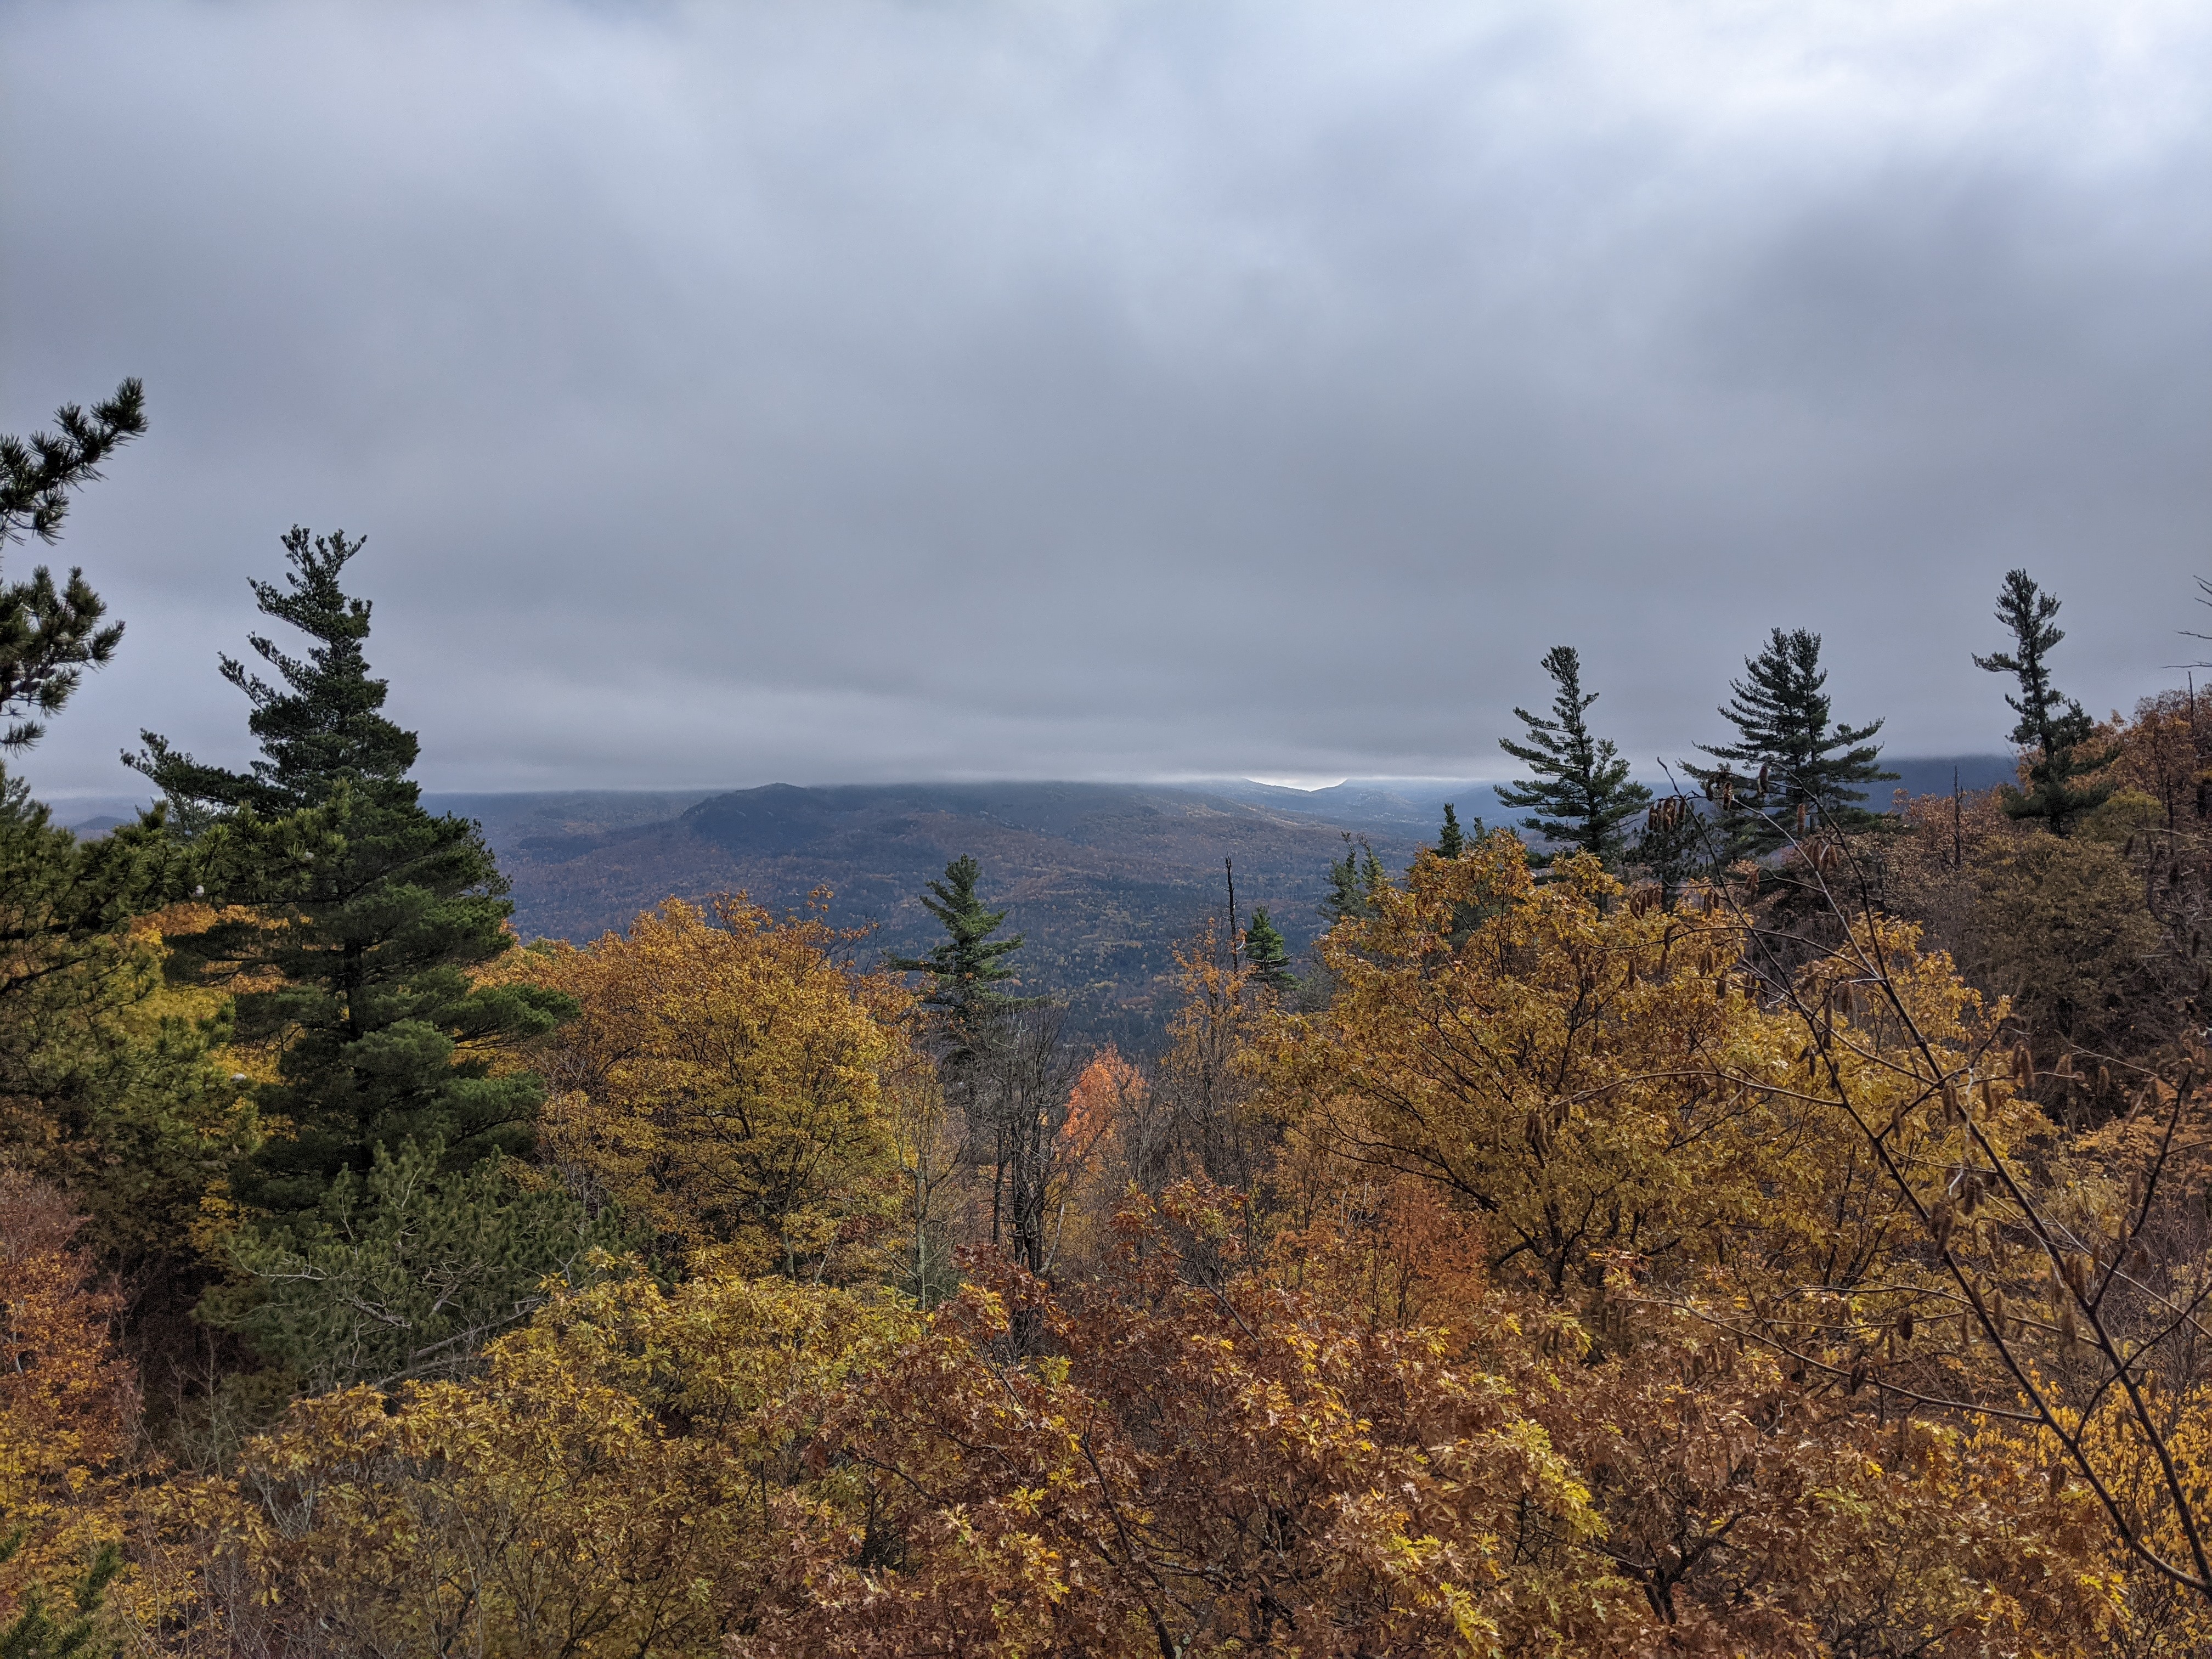 A view of fall foliage from the top of Emenezer Mountain.